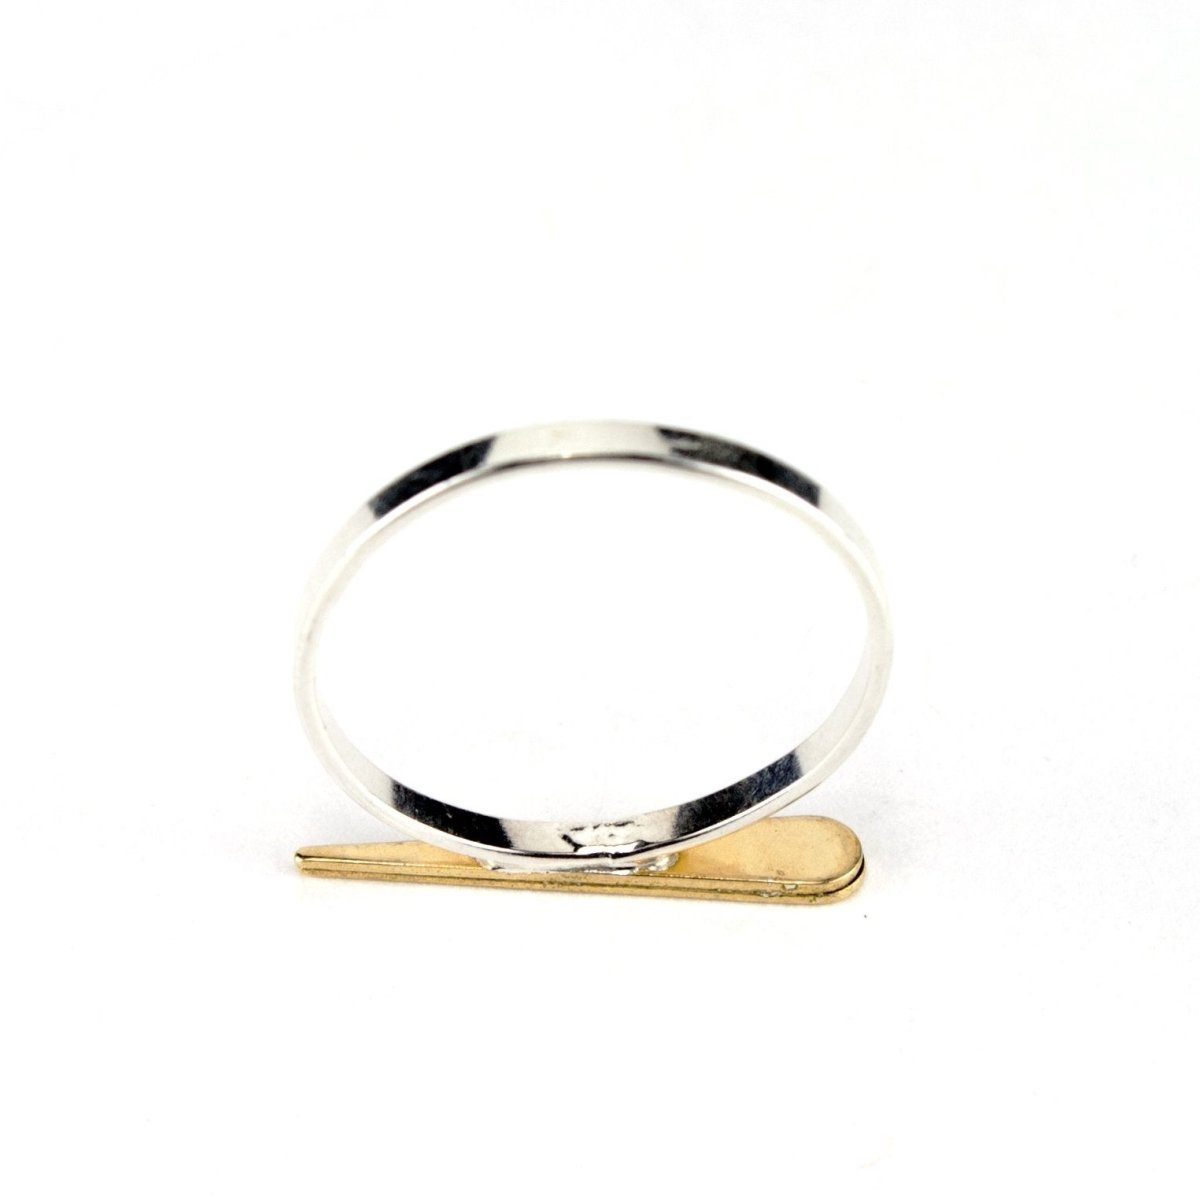 Bottom view of betsy & iya Badlands point ring with gold and sterling silver.